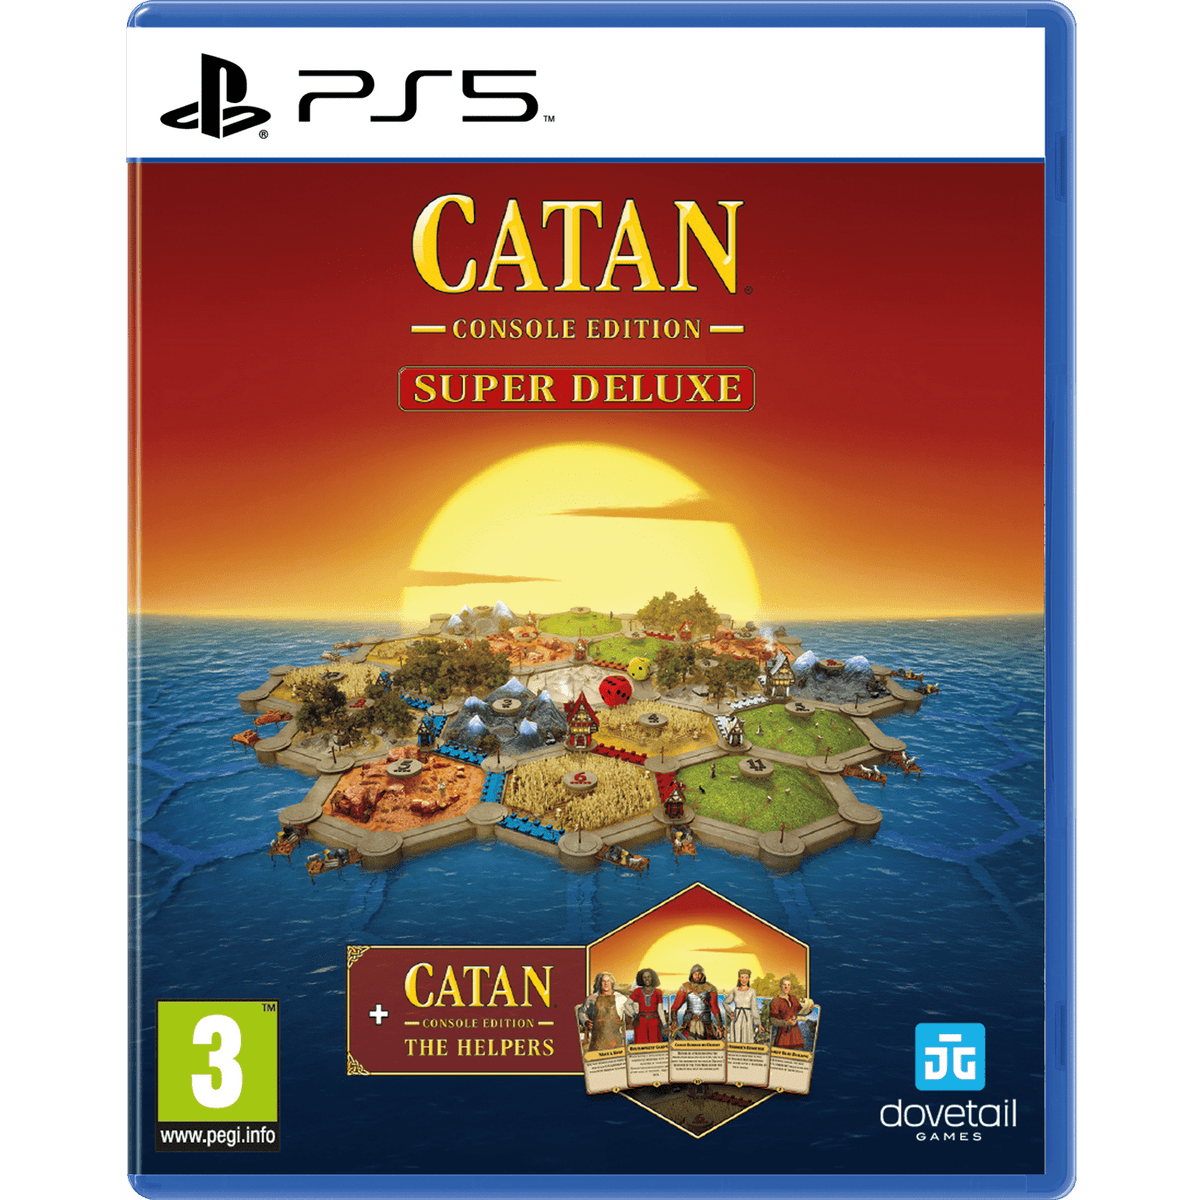 Catan Super Deluxe Console Edition Sony PlayStation 5